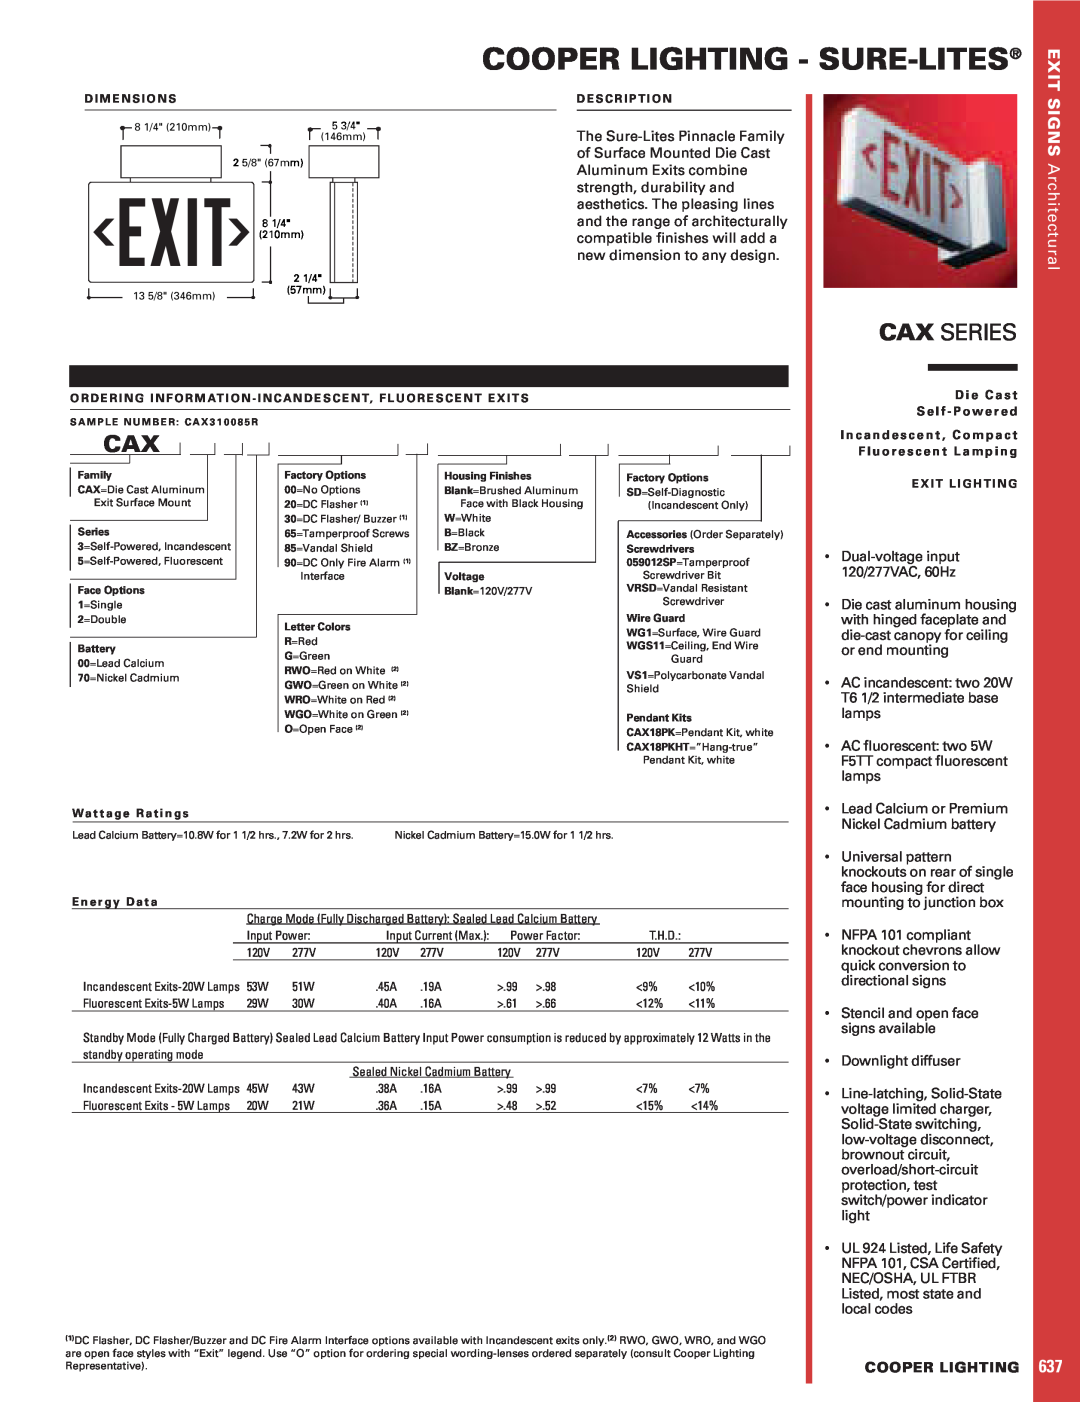 Cooper Lighting CAX Series dimensions SIGNS Architectural, Cooper Lighting - Sure-Lites, Cax Series, Exit 